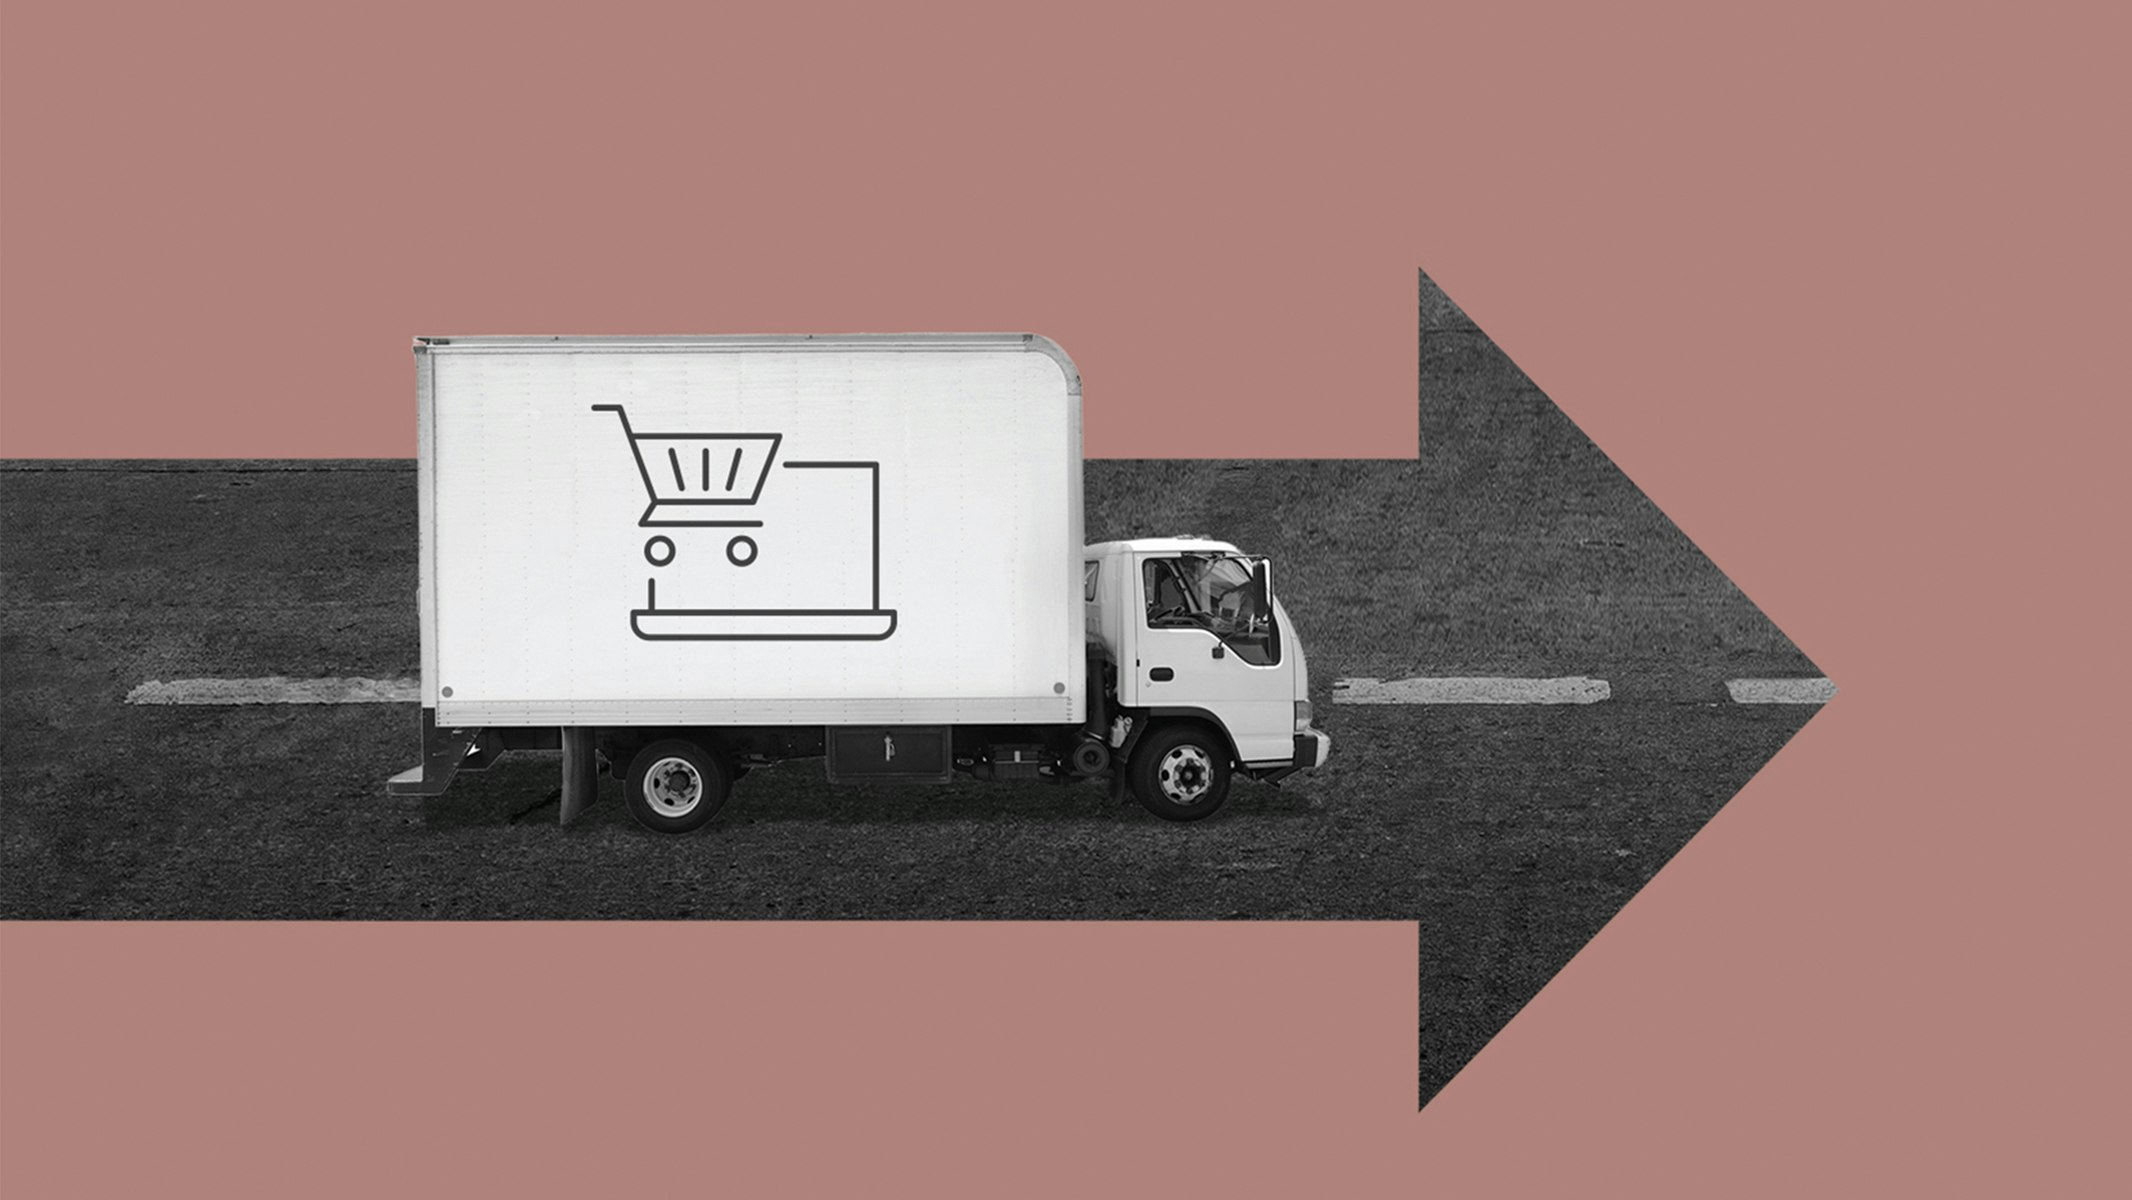 Ecommerce shipping companies: Illustration of delivery truck driving on a forward arrow. The delivery truck has an e-commerce icon on the side to represent Last-Mile delivery.